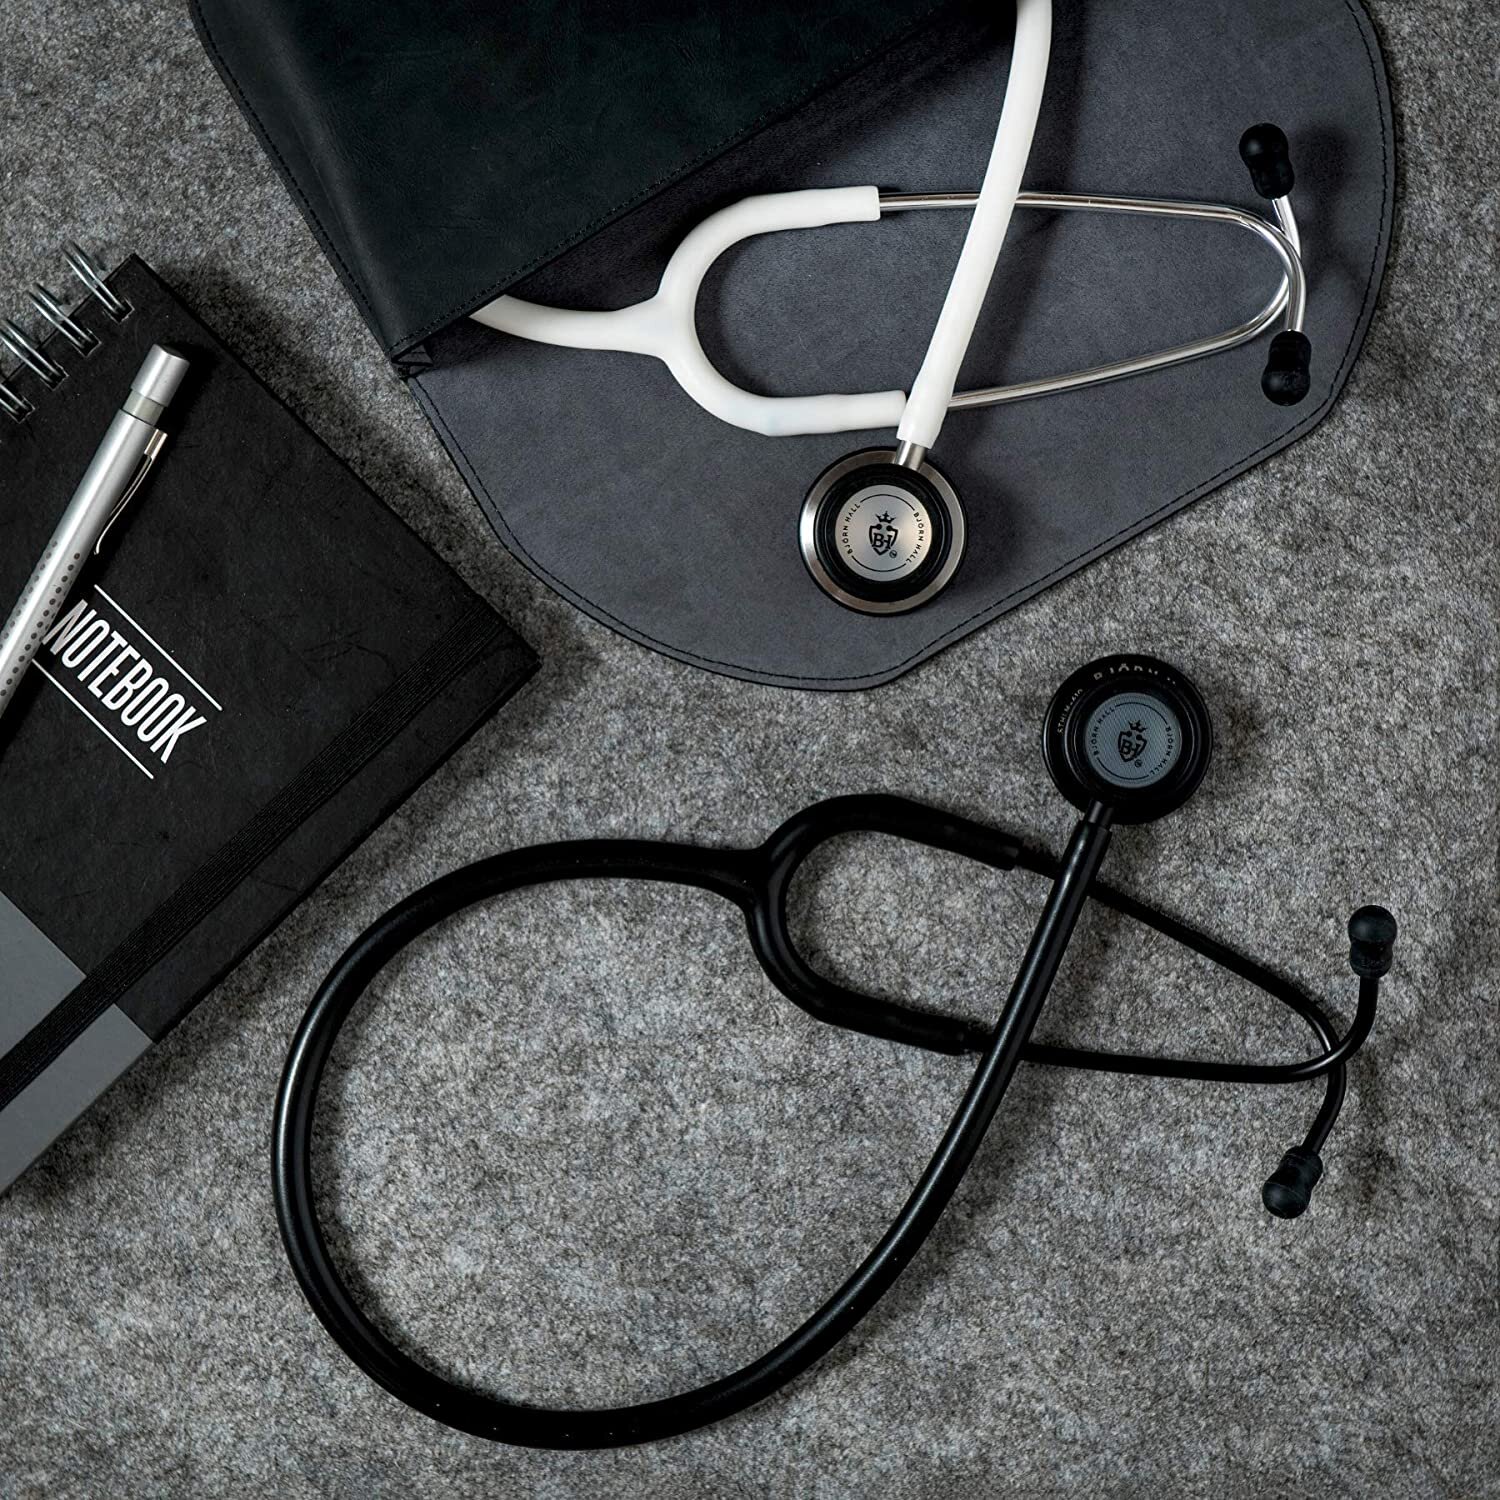 https://images.squarespace-cdn.com/content/v1/5e14bcda323ce7646260ed2f/1586976126163-TL7OQCHWY7CKAIT6F6IC/Black+Stethoscope+and+case